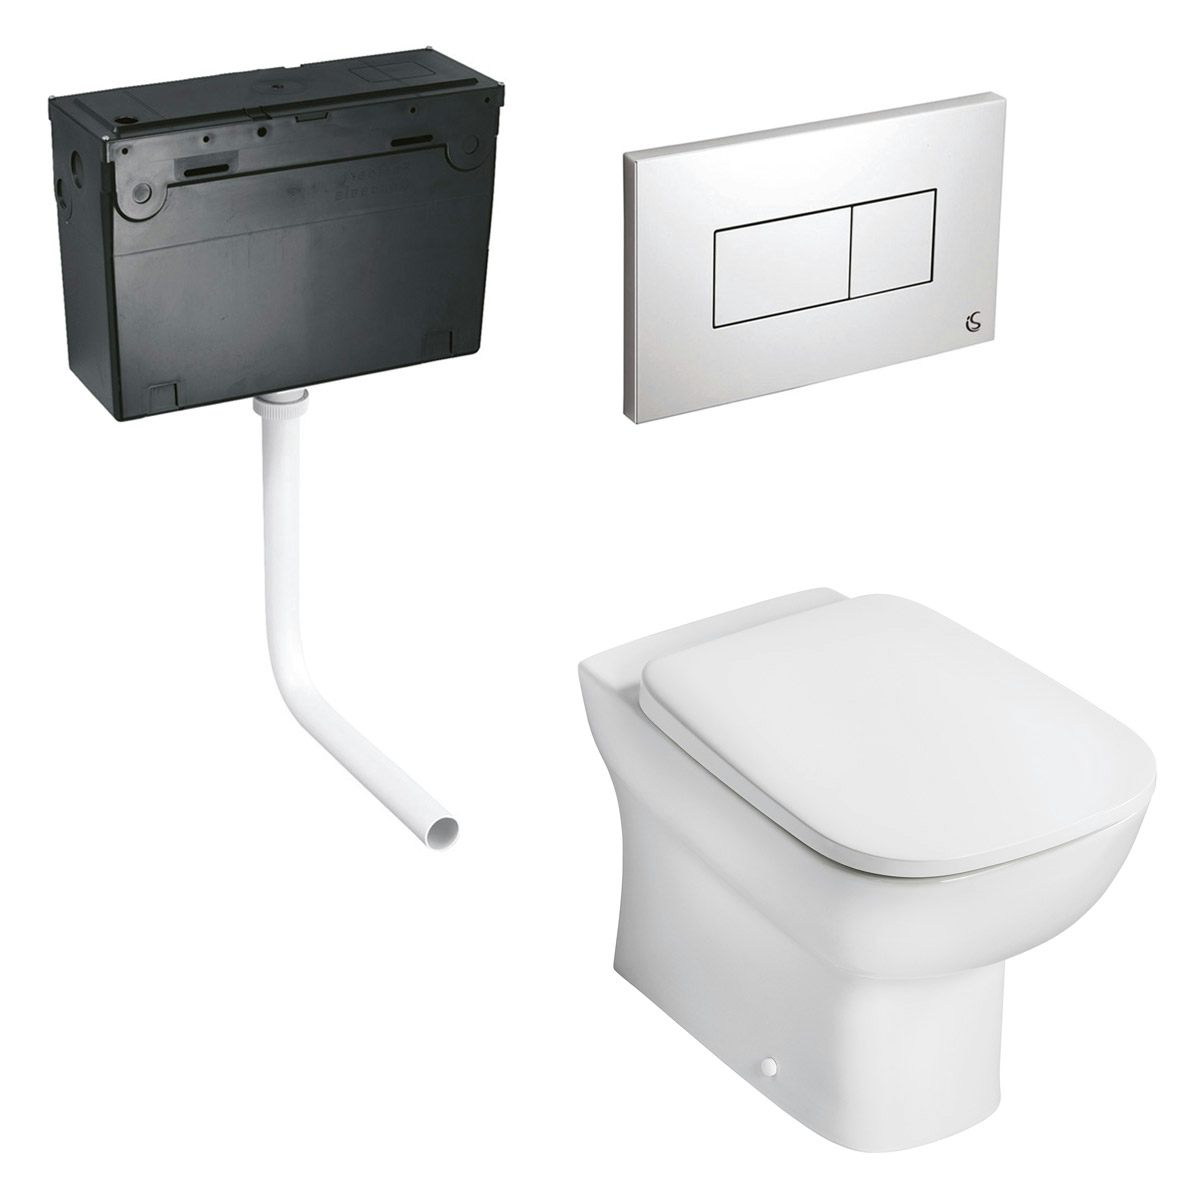 Ideal Standard Studio Echo back to wall toilet with soft close seat, concealed cistern and push